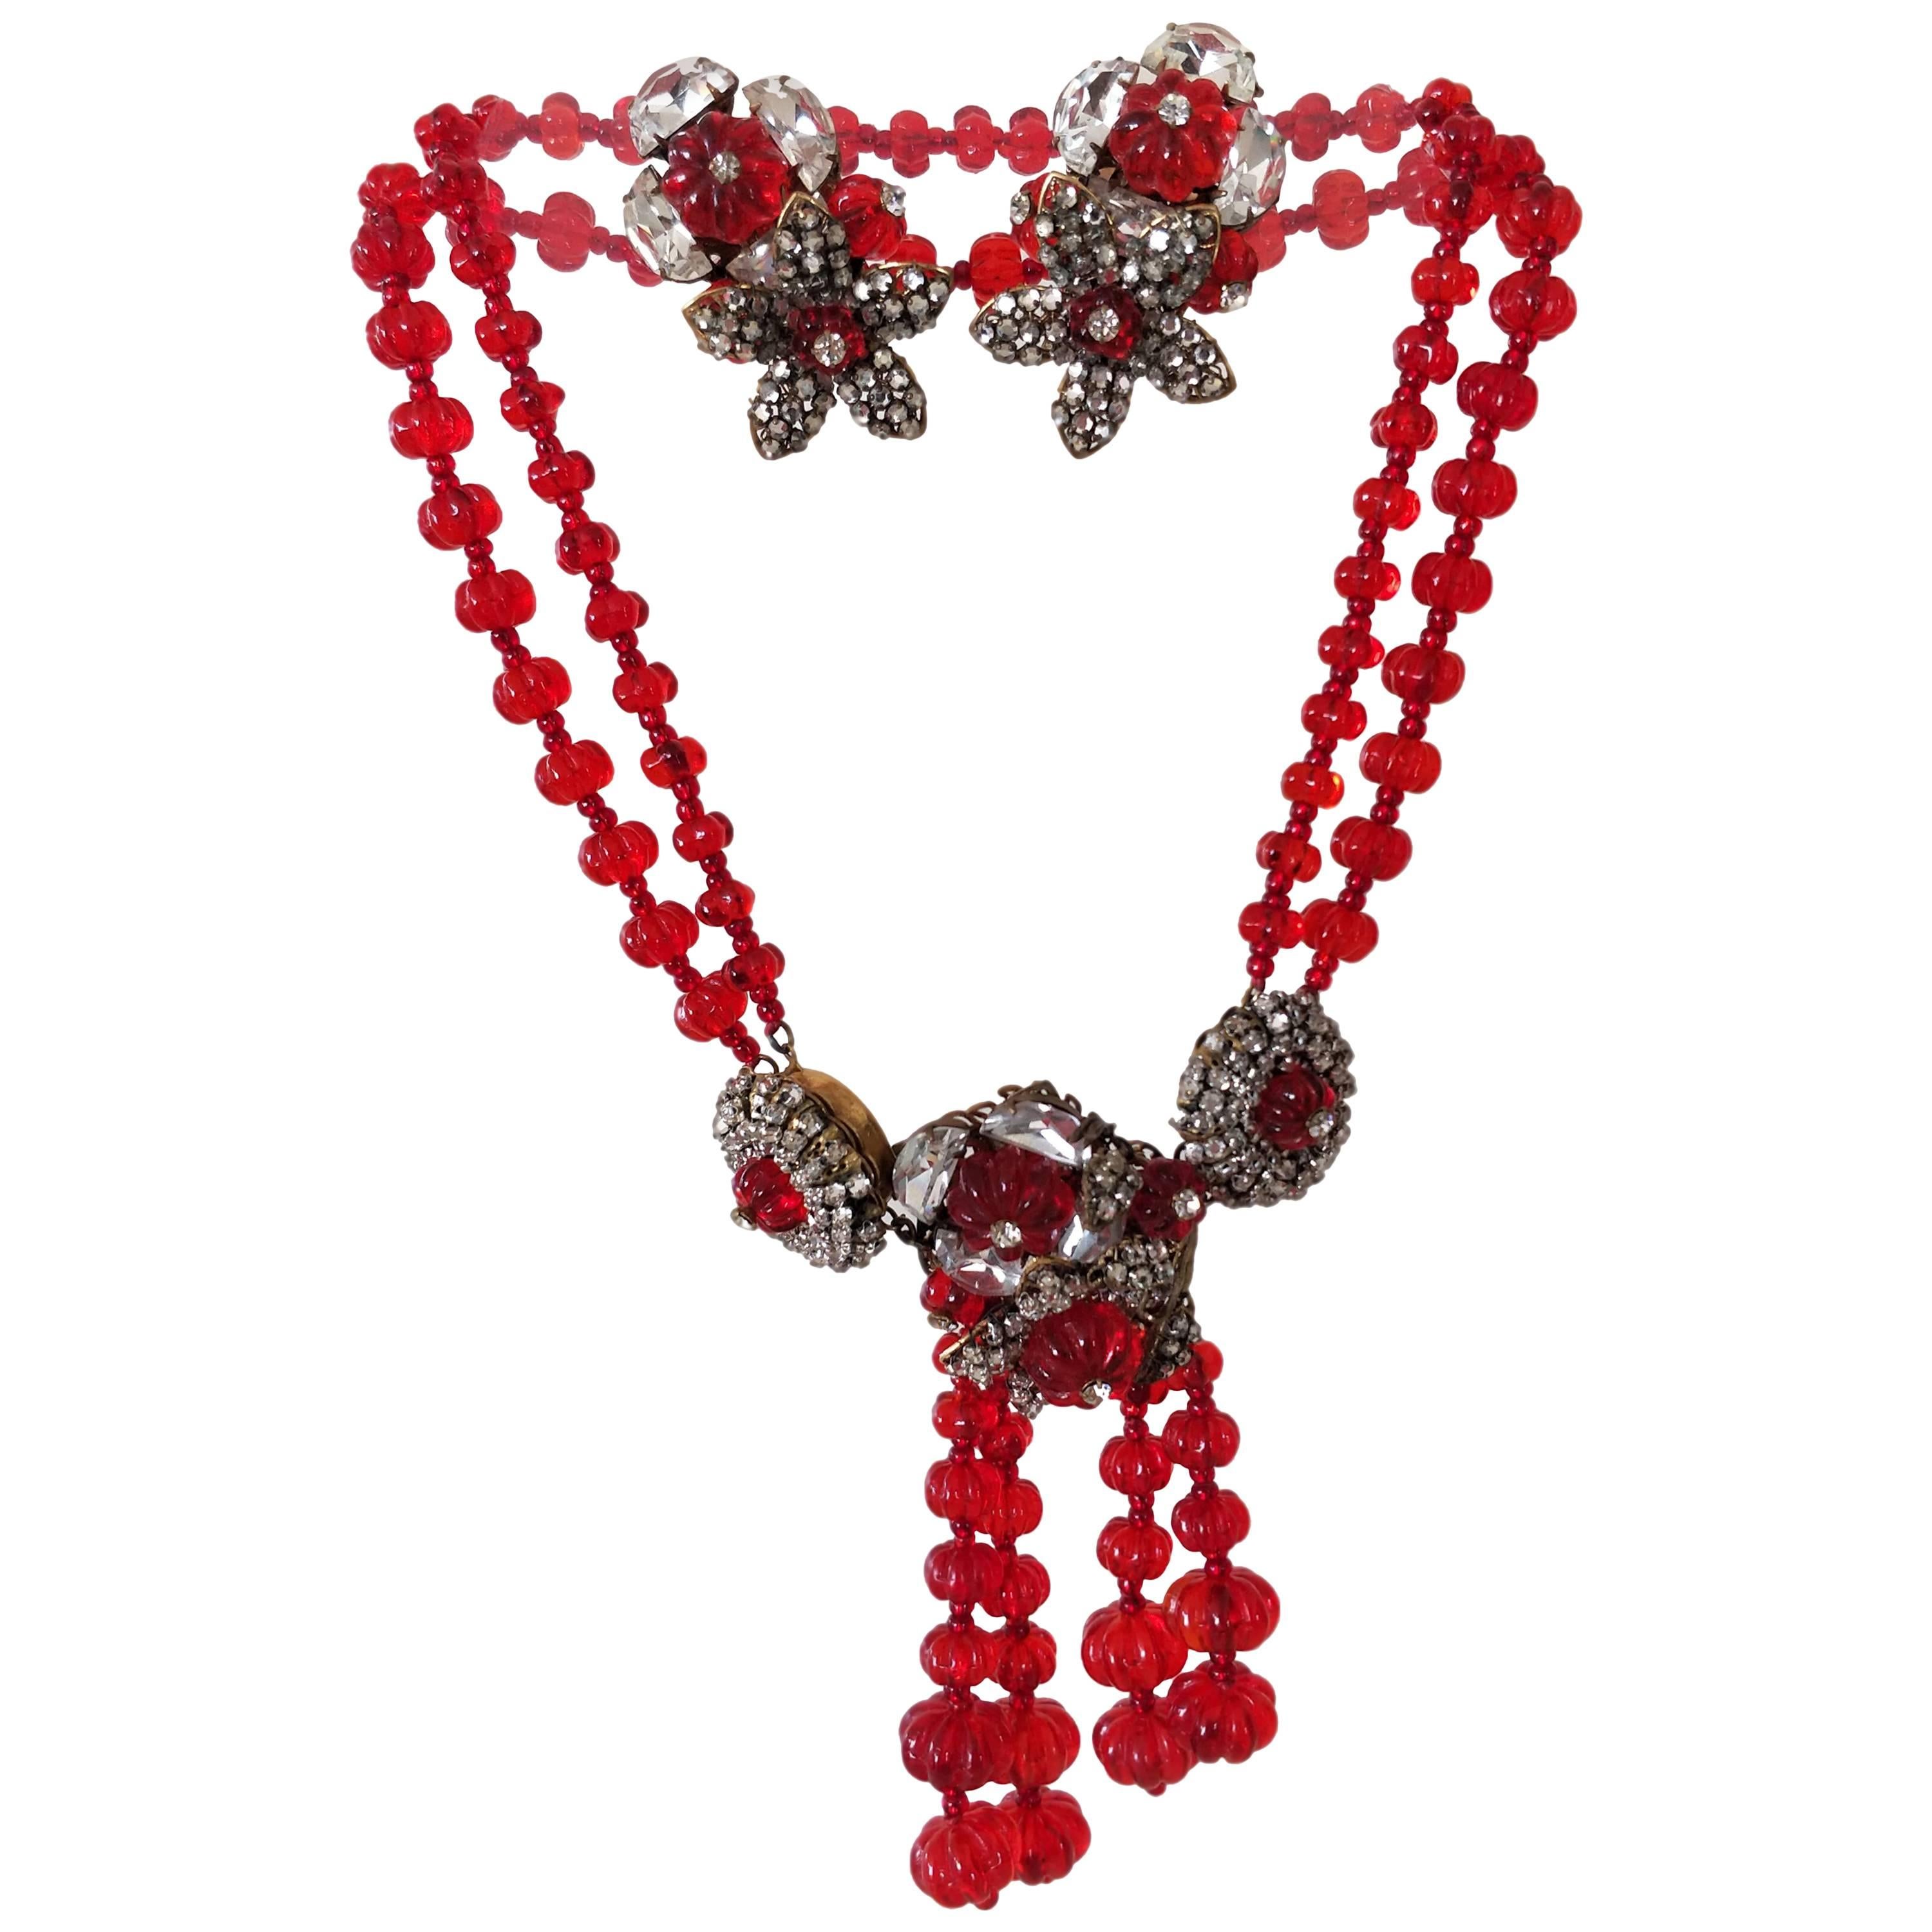 1940s Miriam Haskell Ruby Red Glass Bead, Rhinestone Necklace and Earring Set